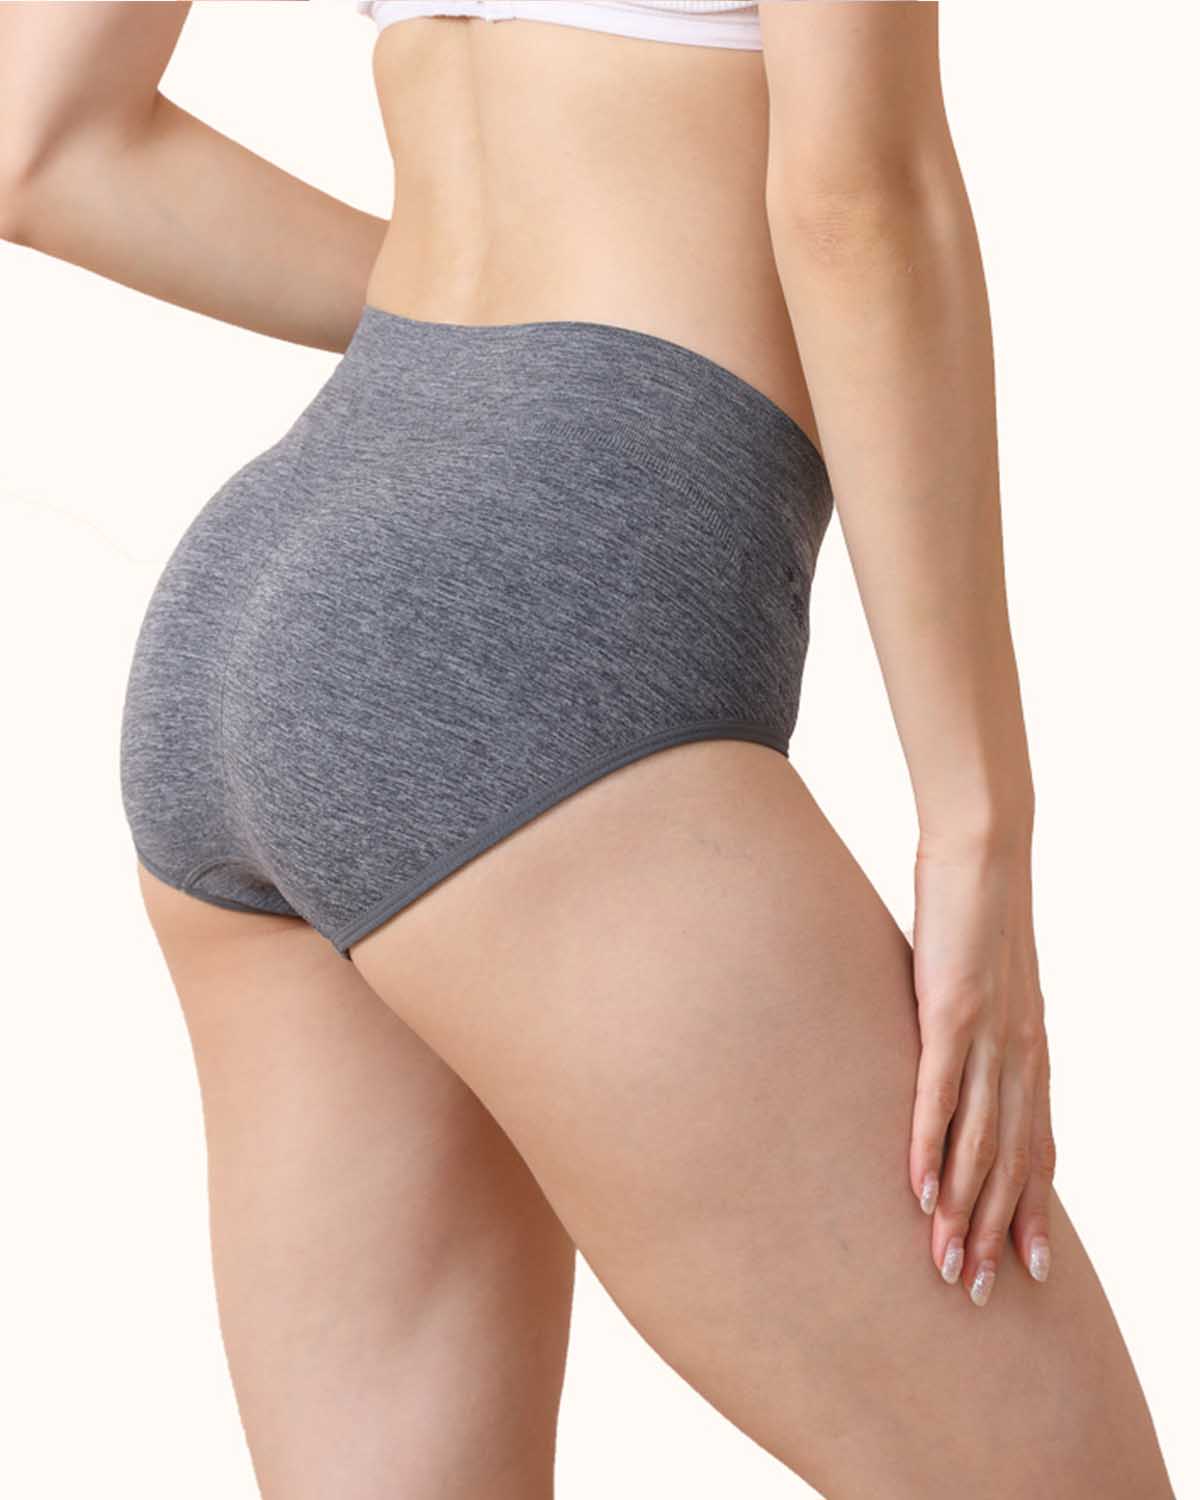 High Waist Invisible Panties - Full Coverage, Soft & Comfortable